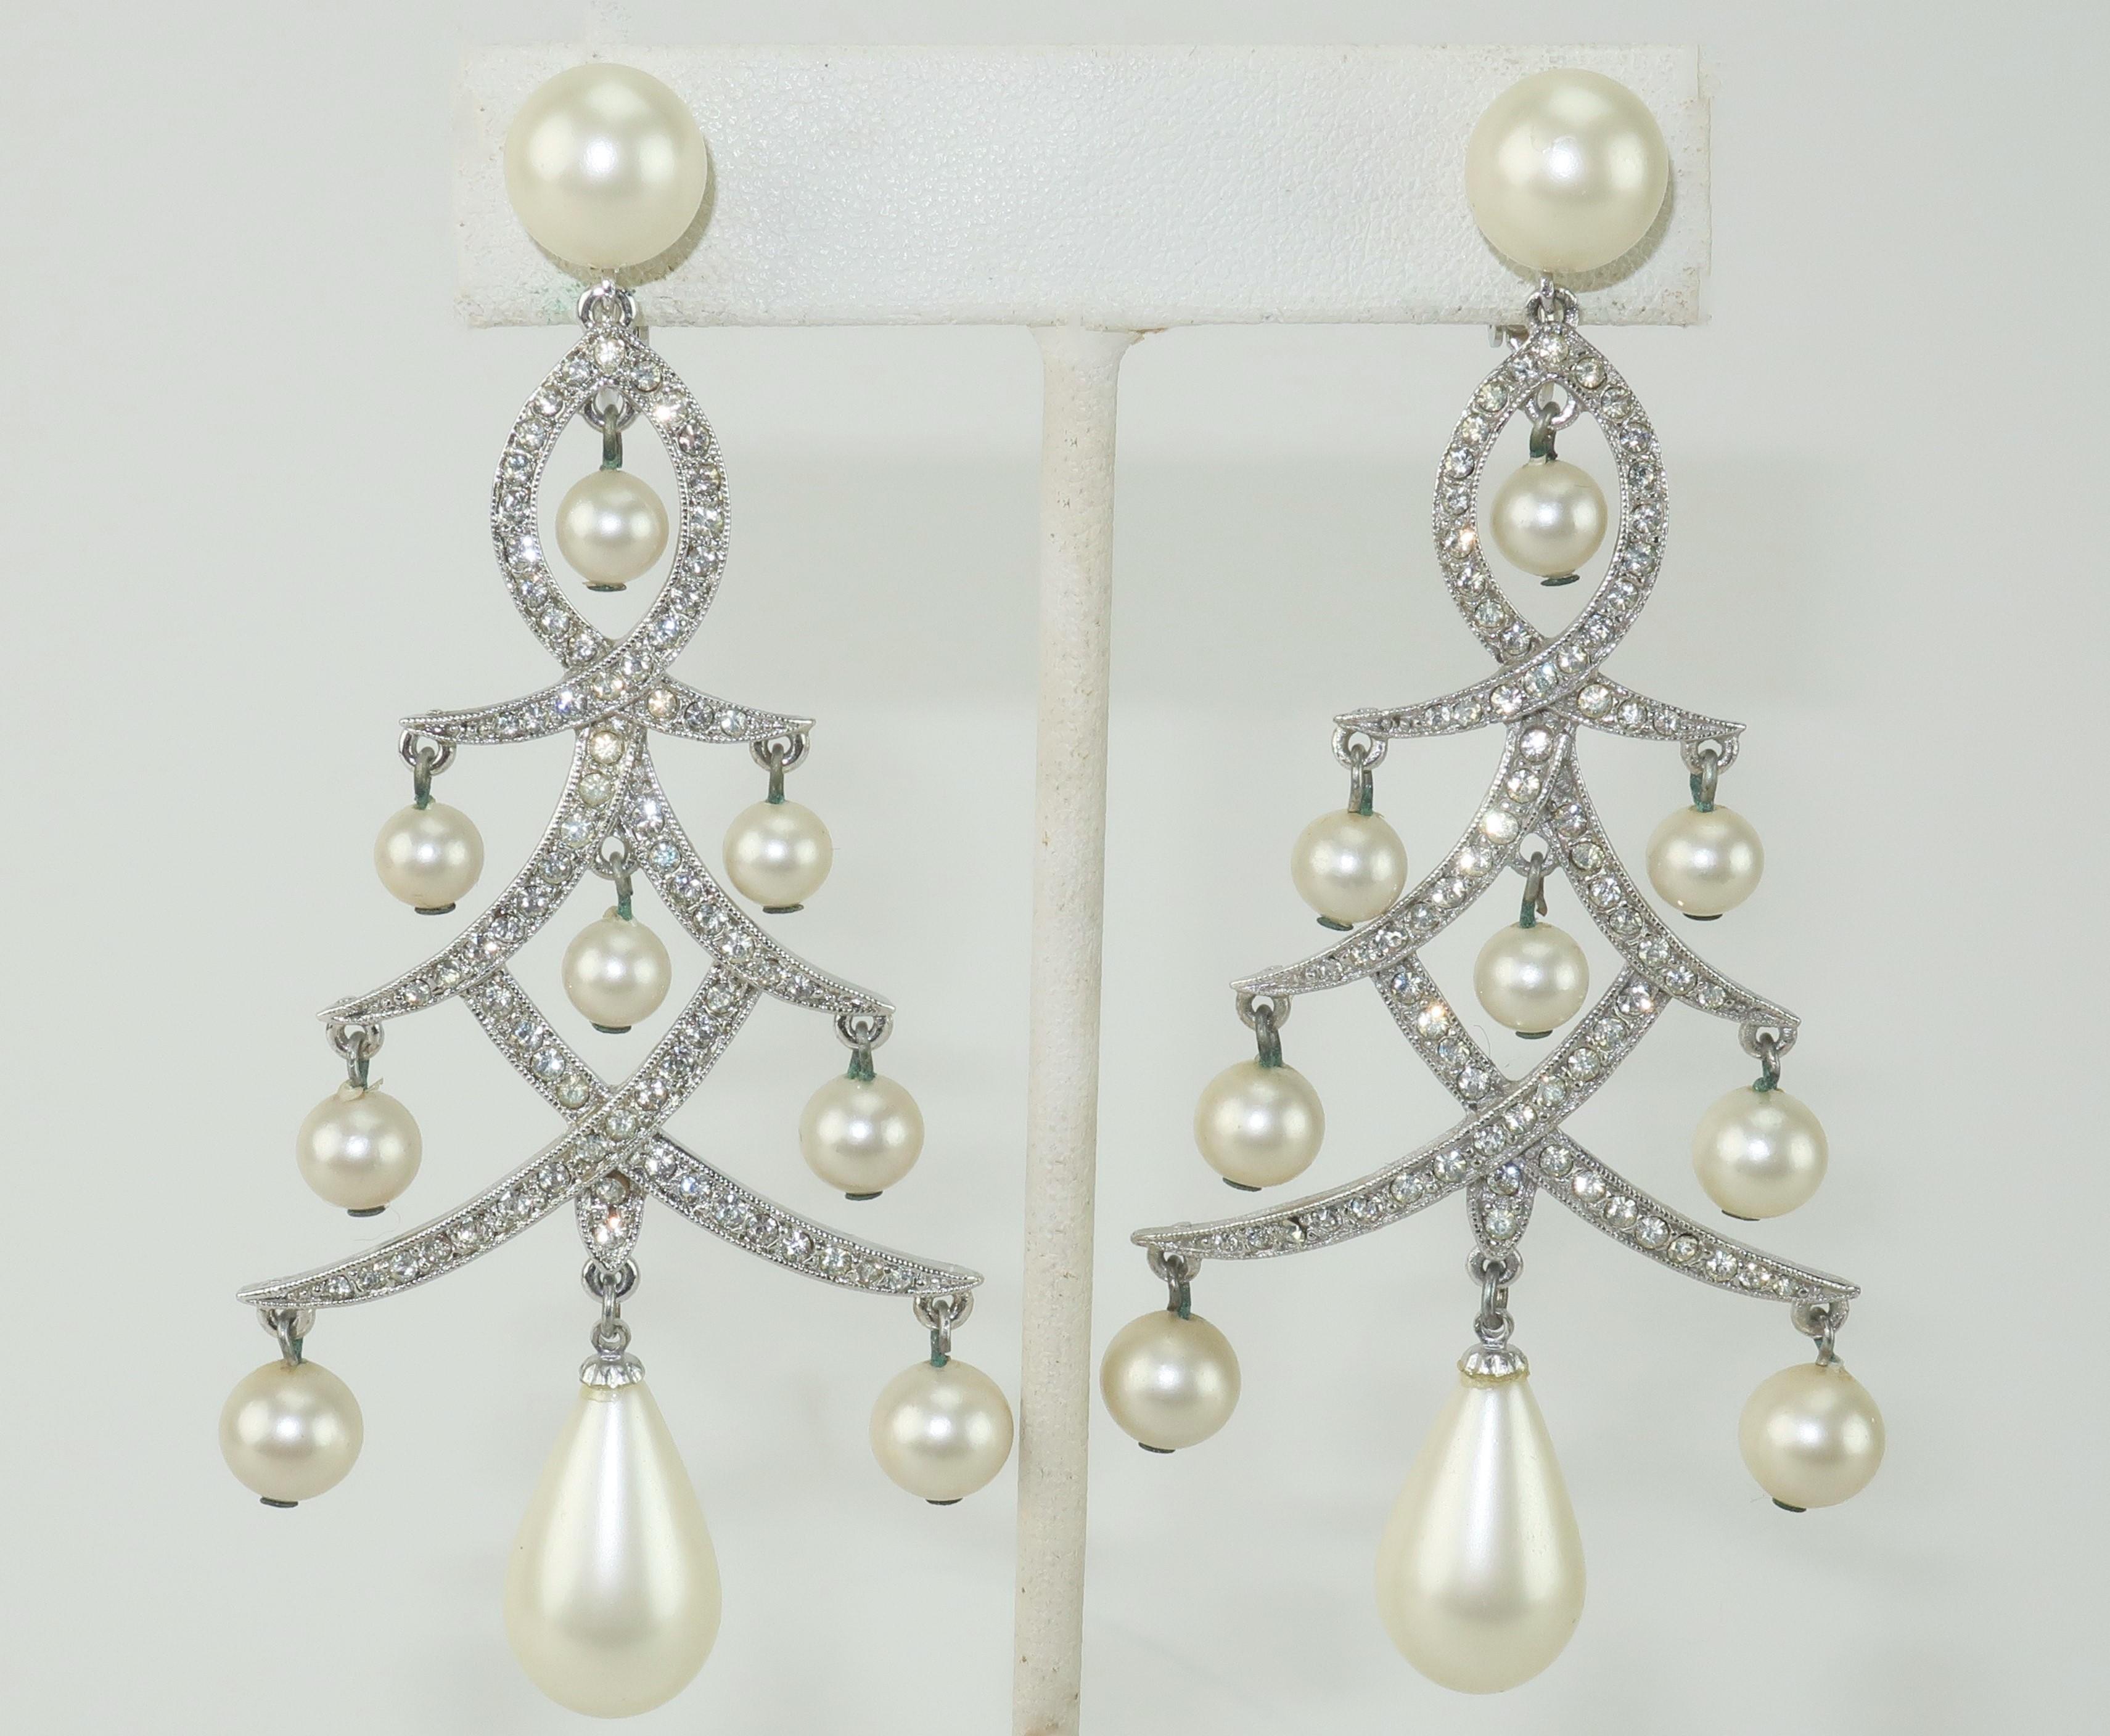 1950’s Marvella chandelier earrings with screwback clip on hardware.  Silver tone metal is embellished with crystal rhinestones and teardrop shaped faux pearls in a Christmas tree shape making these the perfect accessory for the holidays. 